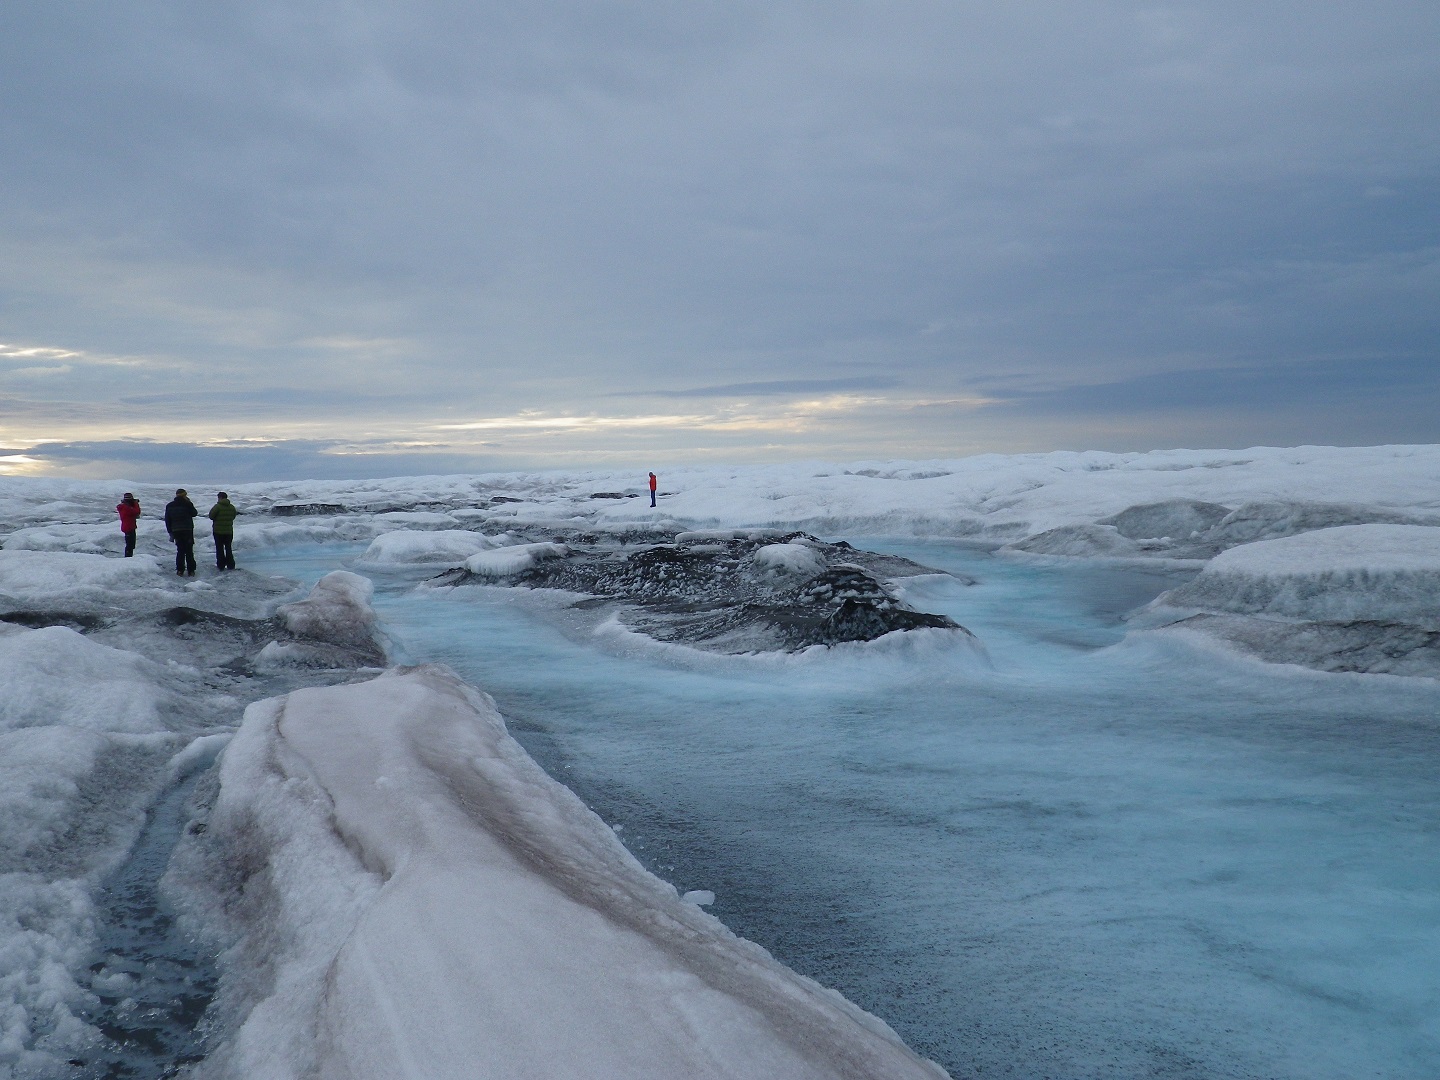 Some of the research team on the western edge of the Greenland Ice Sheet.